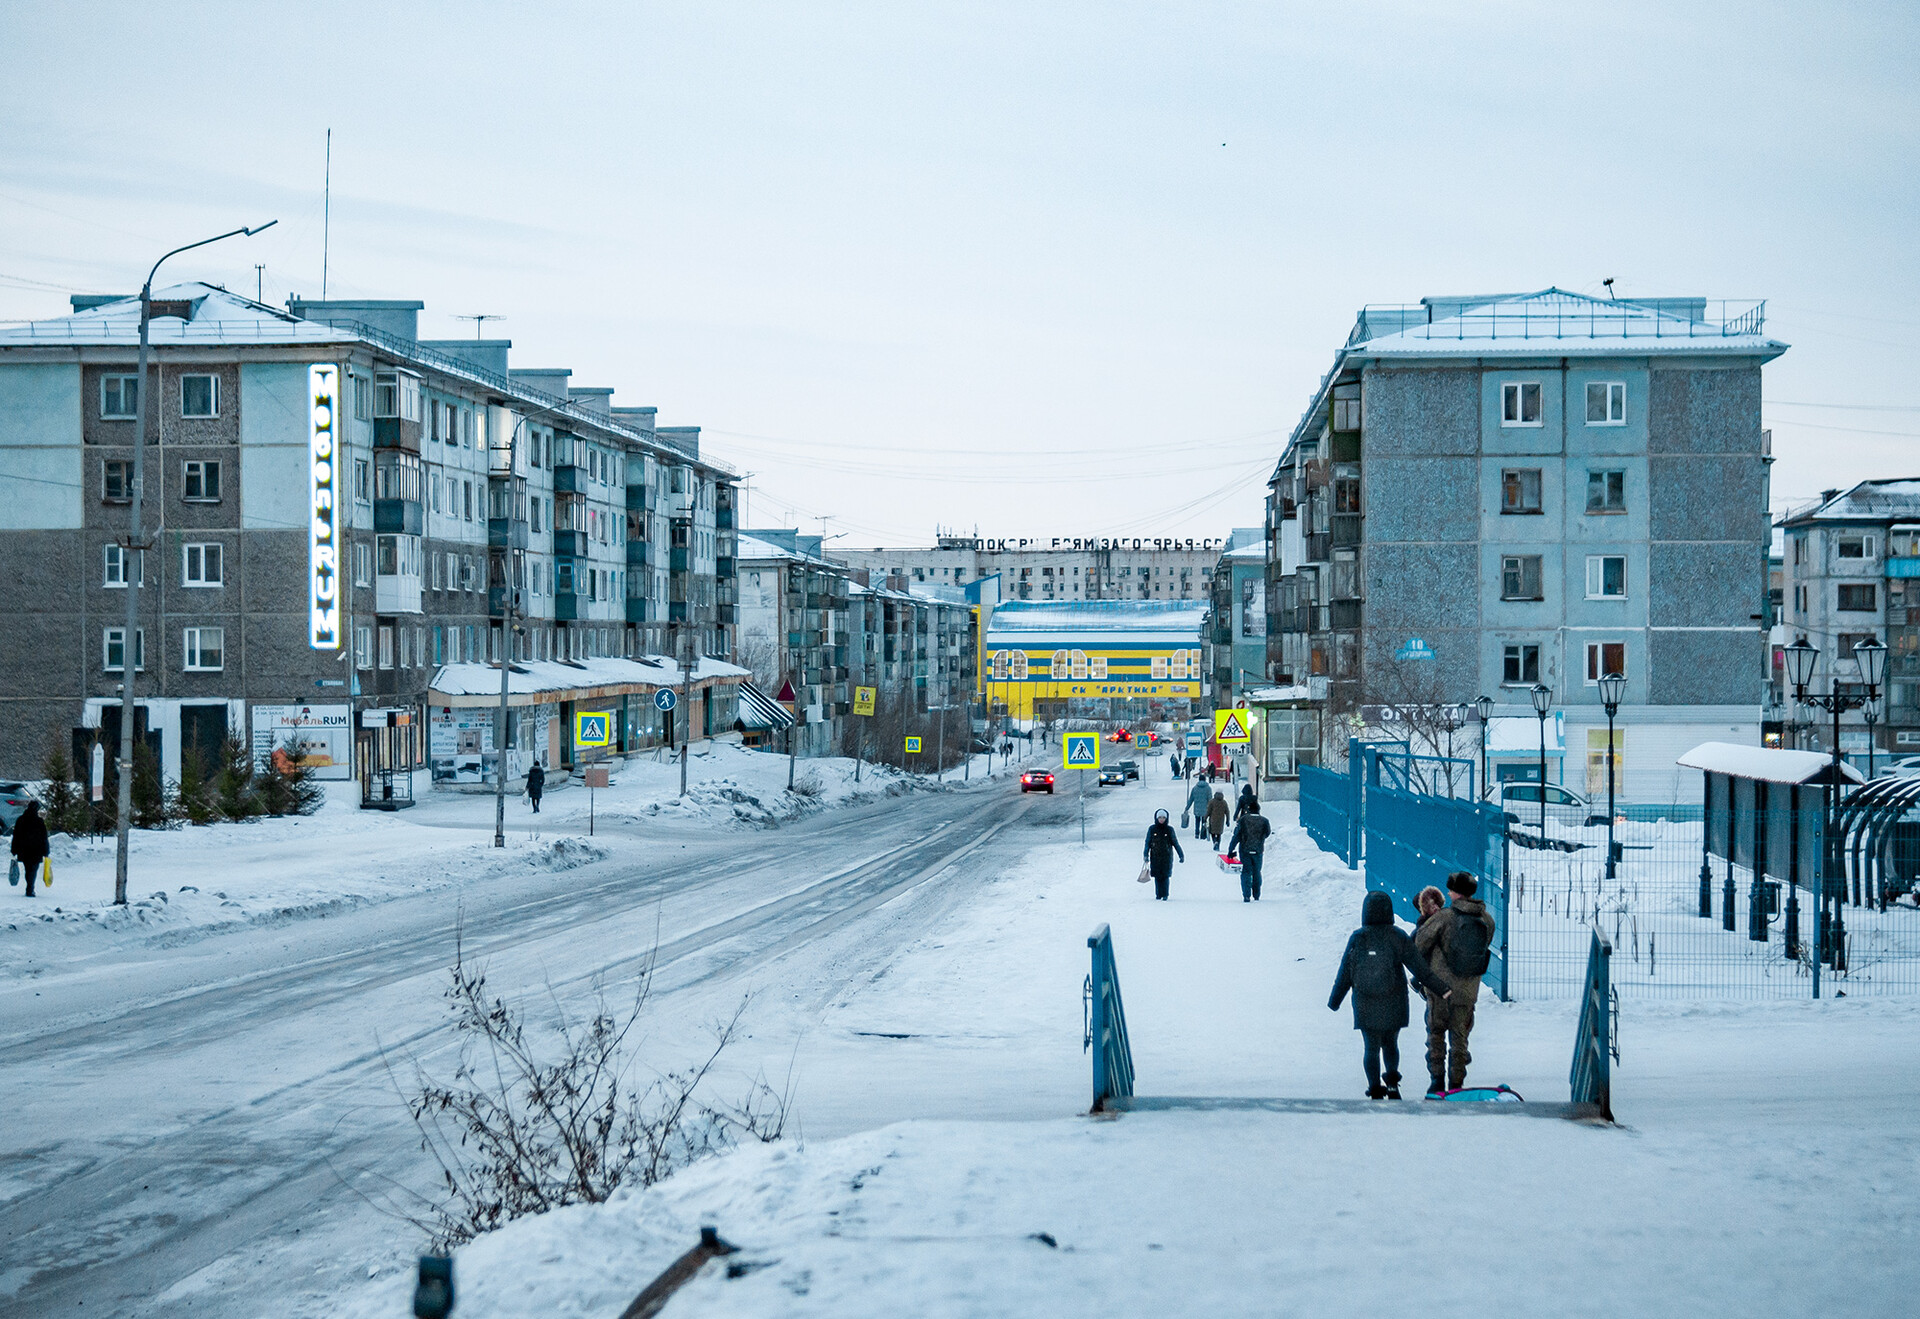 This is how the center of Vorkuta looks like. In the distance is a 